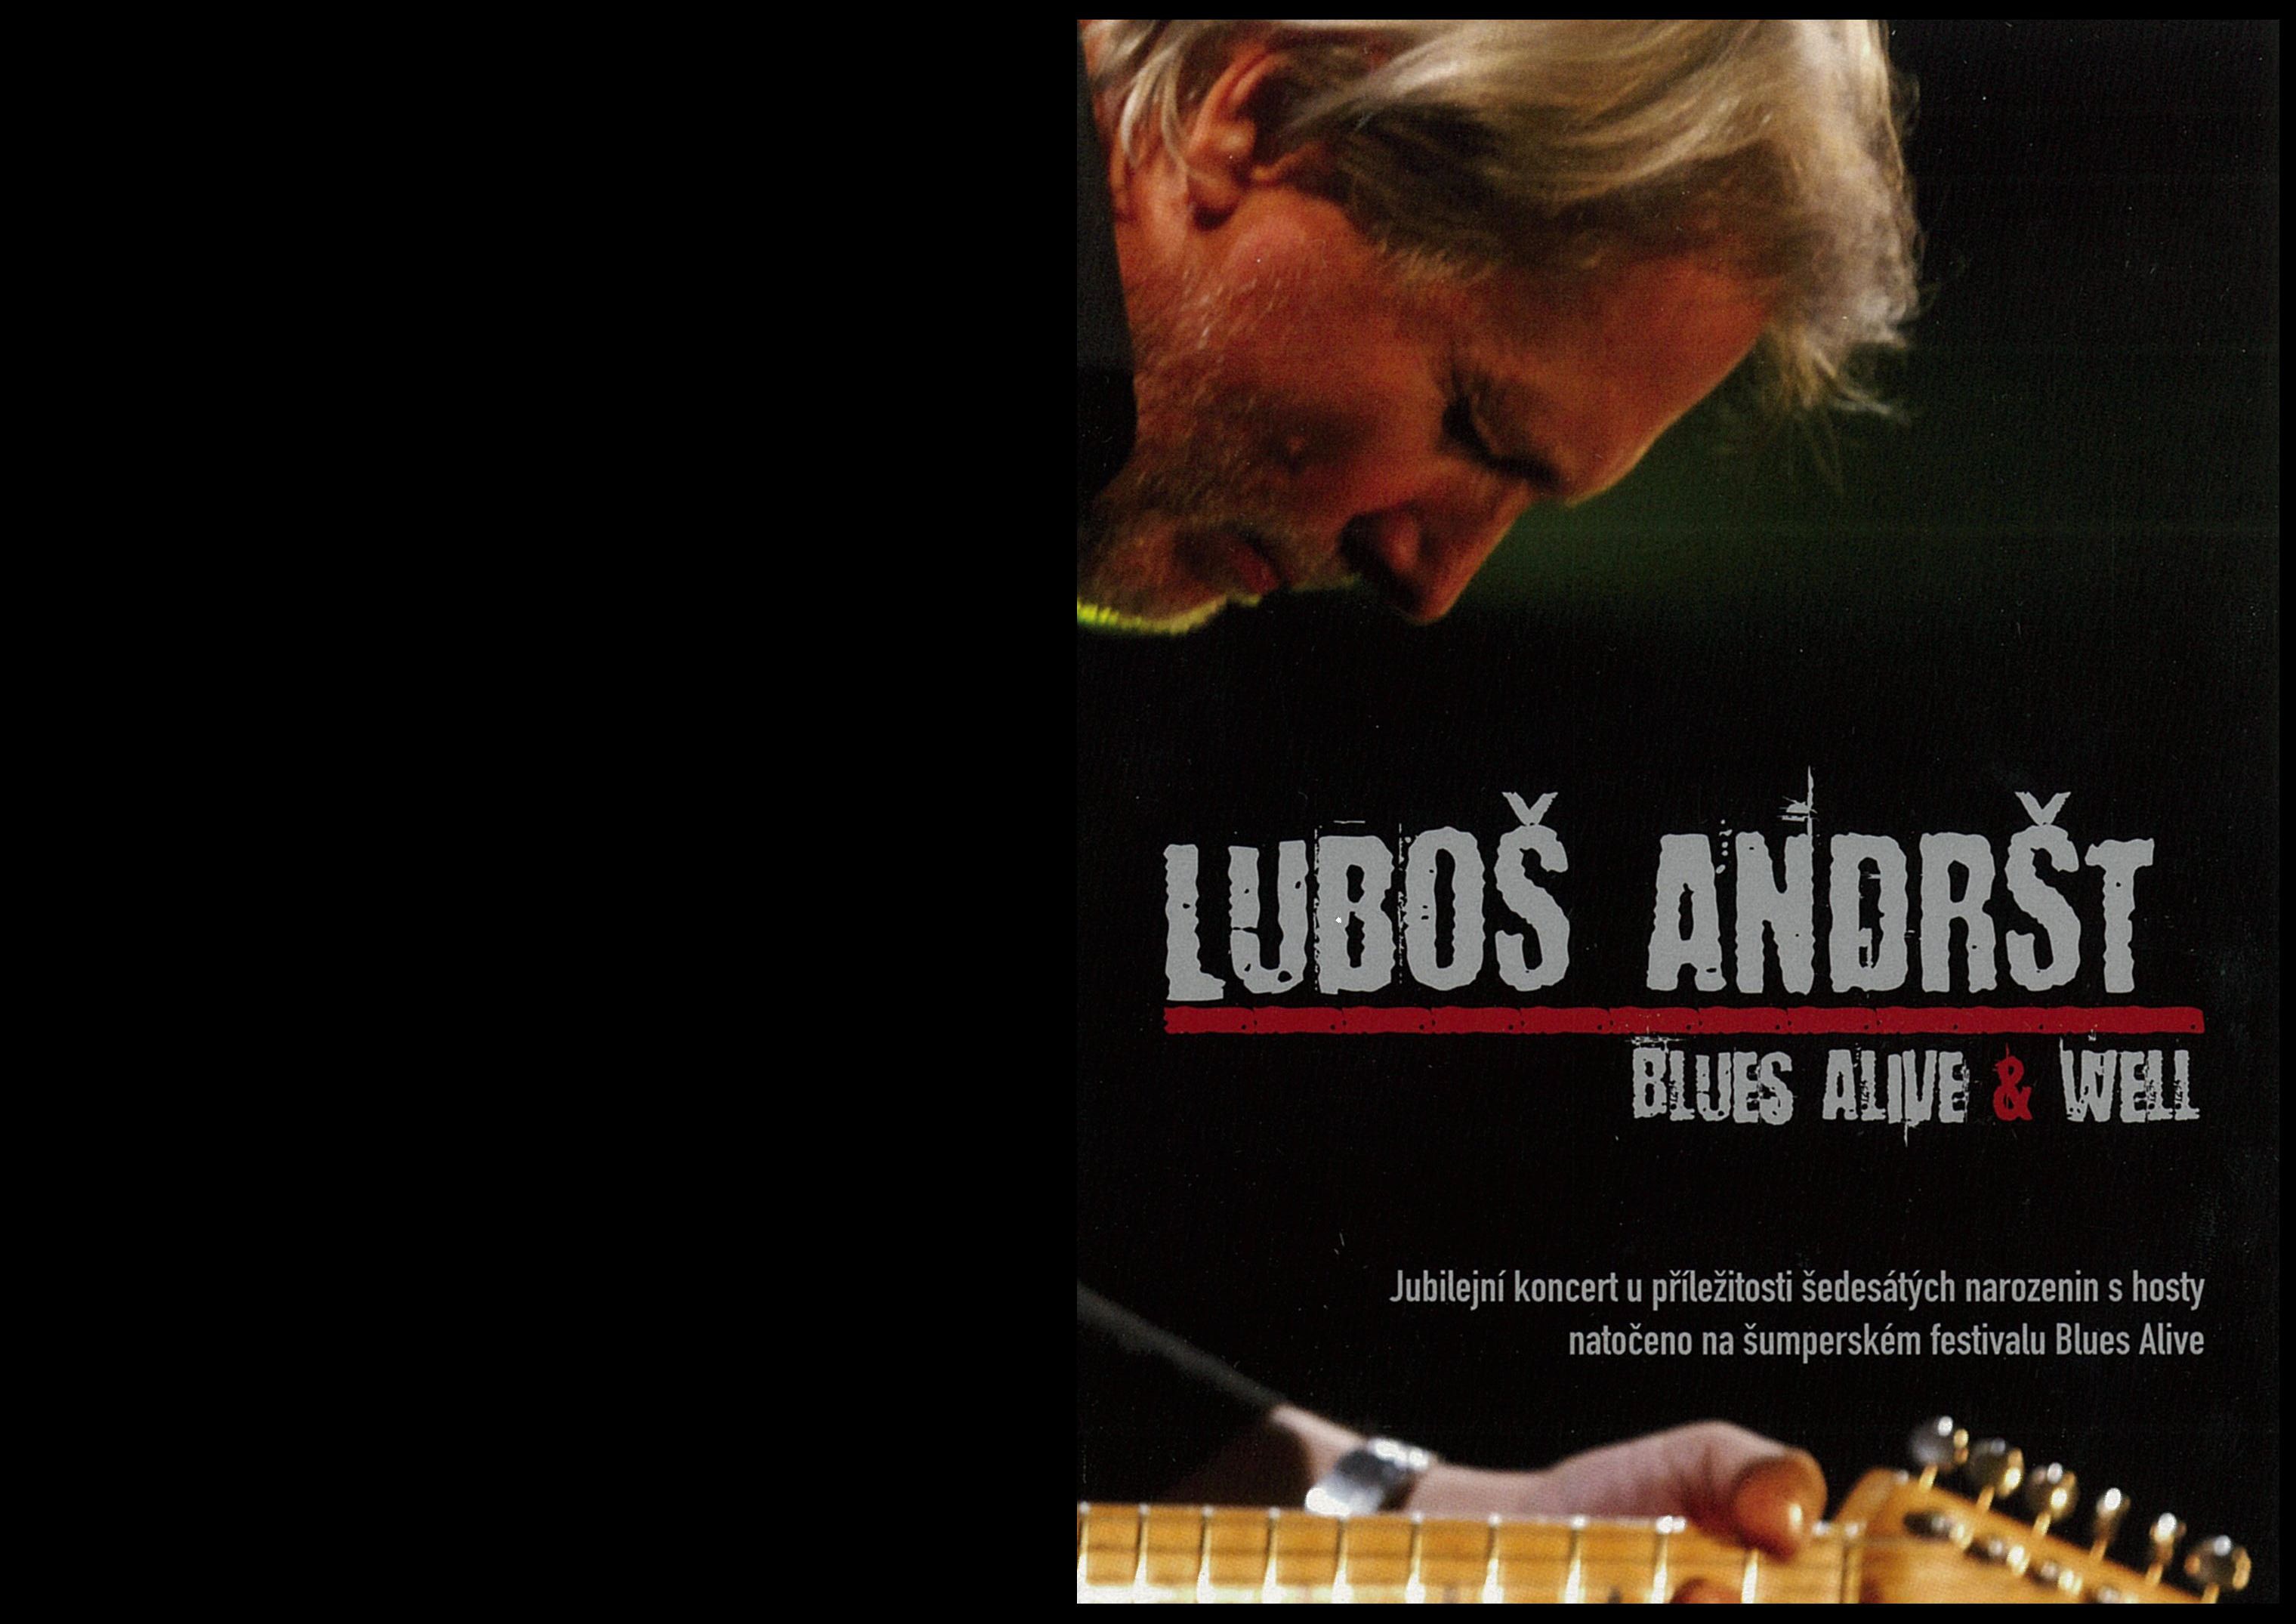 CD Shop - ANDRST LUBOS BLUES ALIVE & WELL